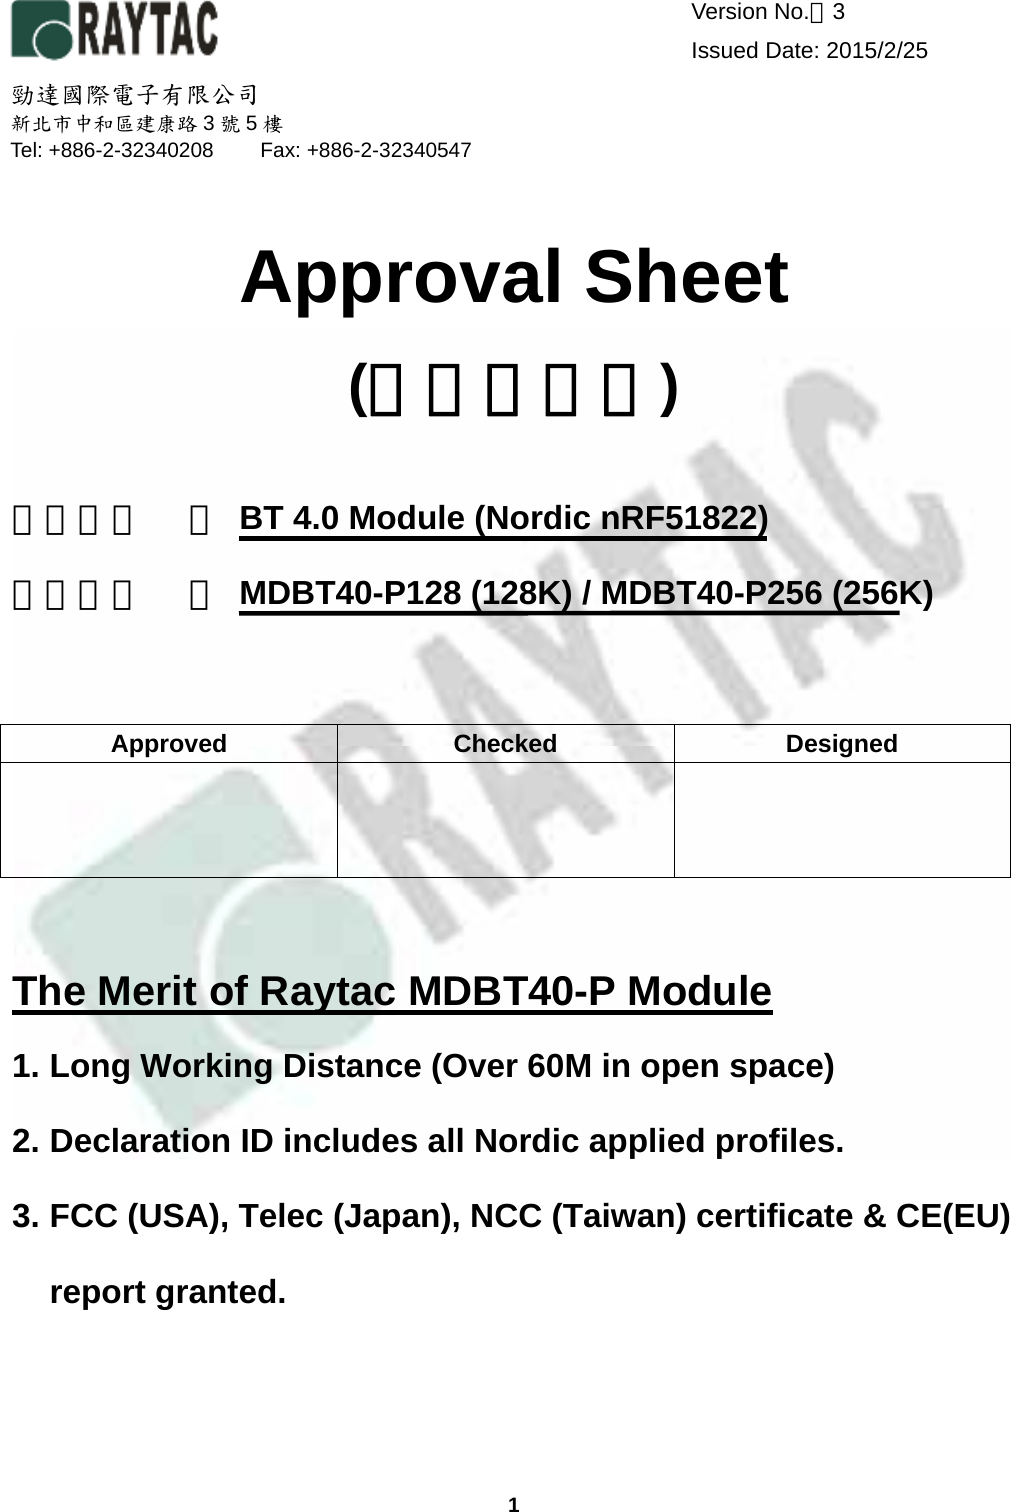  1  Version No.：3     Issued Date: 2015/2/25     Approval Sheet (產品承認書)  產品名稱 ： BT 4.0 Module (Nordic nRF51822)         產品型號 ： MDBT40-P128 (128K) / MDBT40-P256 (256K)                                                                               The Merit of Raytac MDBT40-P Module 1. Long Working Distance (Over 60M in open space) 2. Declaration ID includes all Nordic applied profiles. 3. FCC (USA), Telec (Japan), NCC (Taiwan) certificate &amp; CE(EU) report granted.Approved Checked Designed    勁達國際電子有限公司 新北市中和區建康路3號5樓 Tel: +886-2-32340208  Fax: +886-2-32340547 